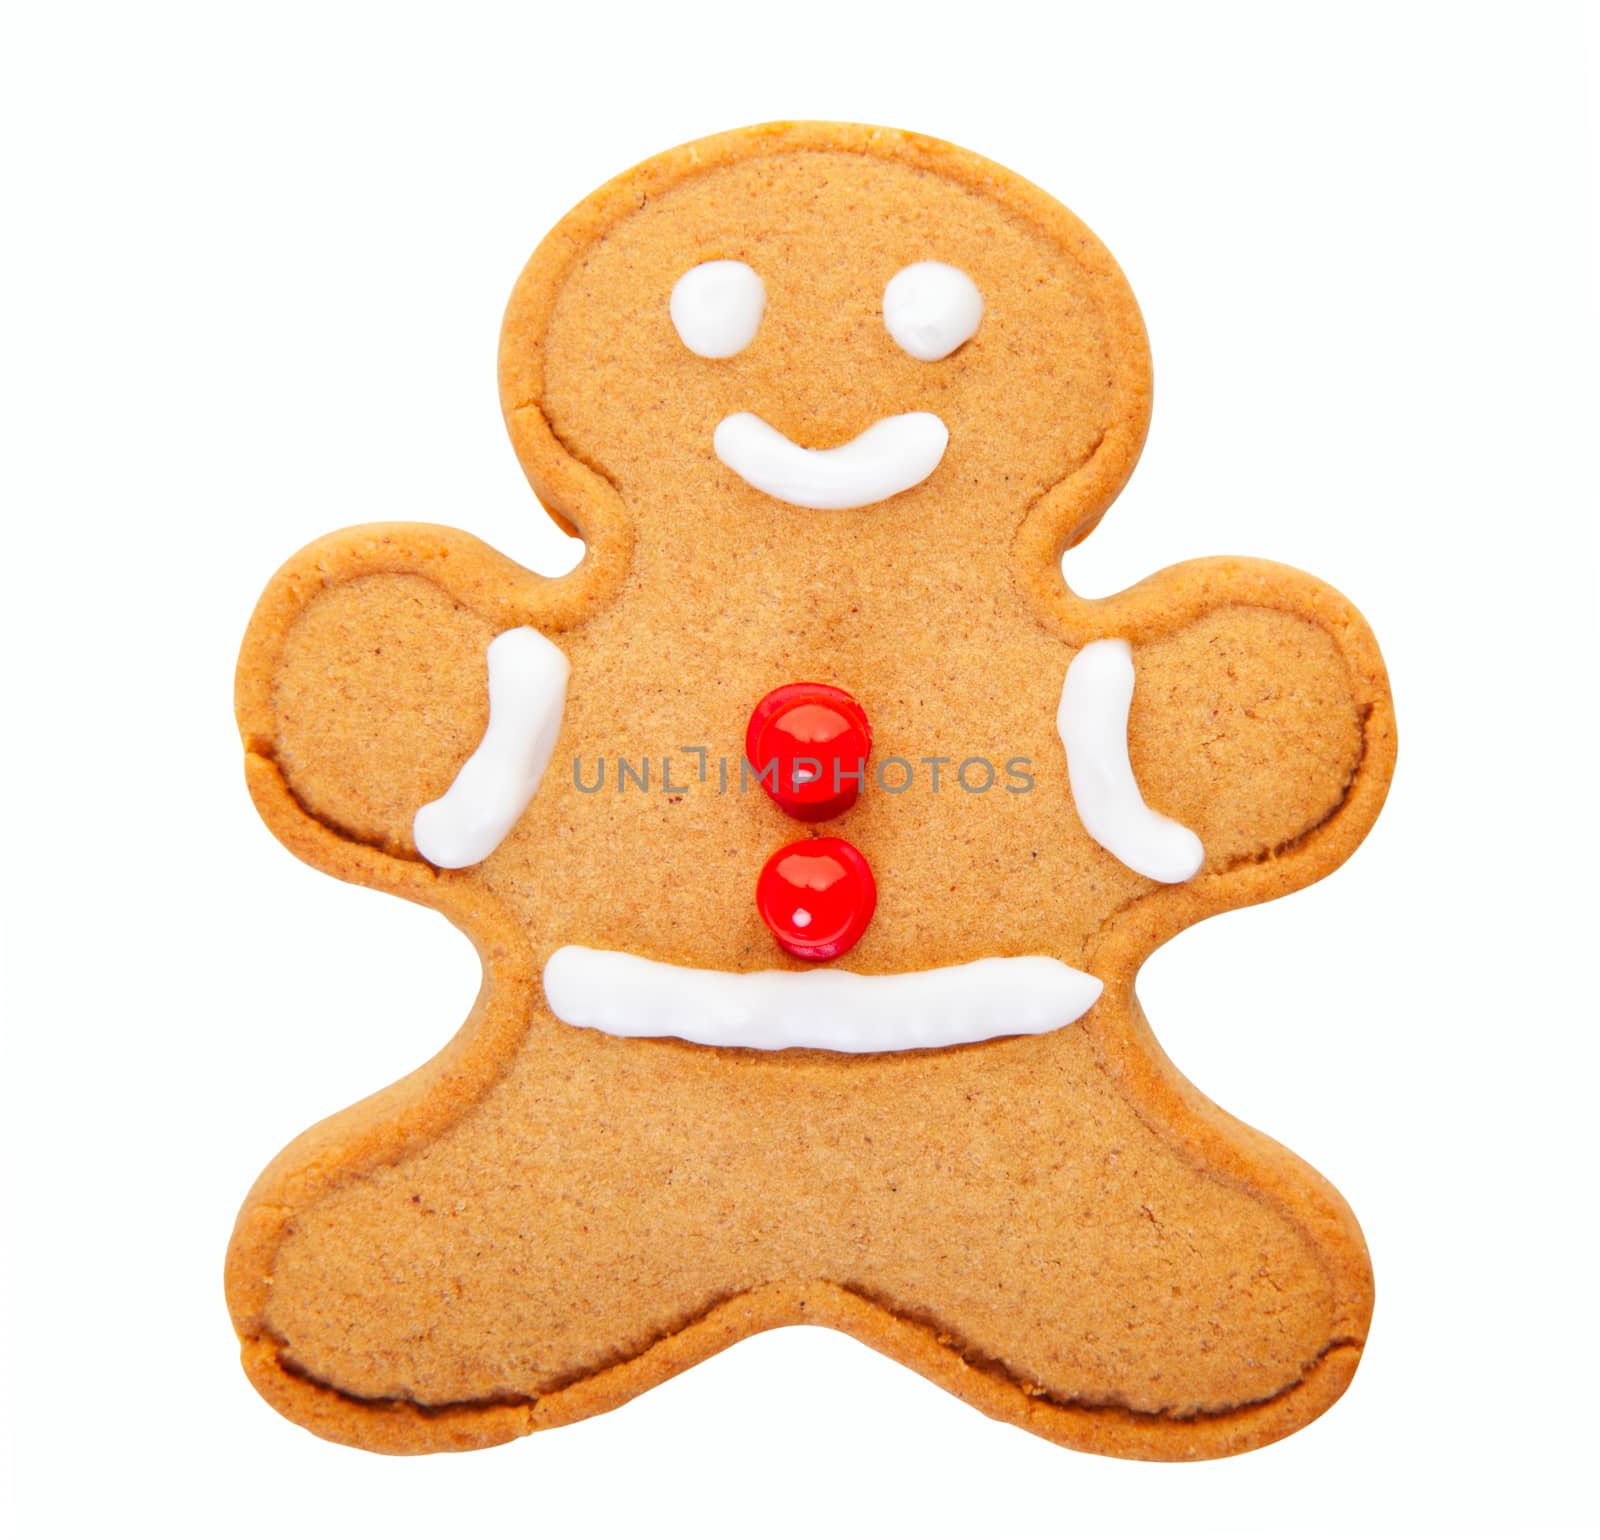 A freshly baked and decorated gingerbread man with clipping path.